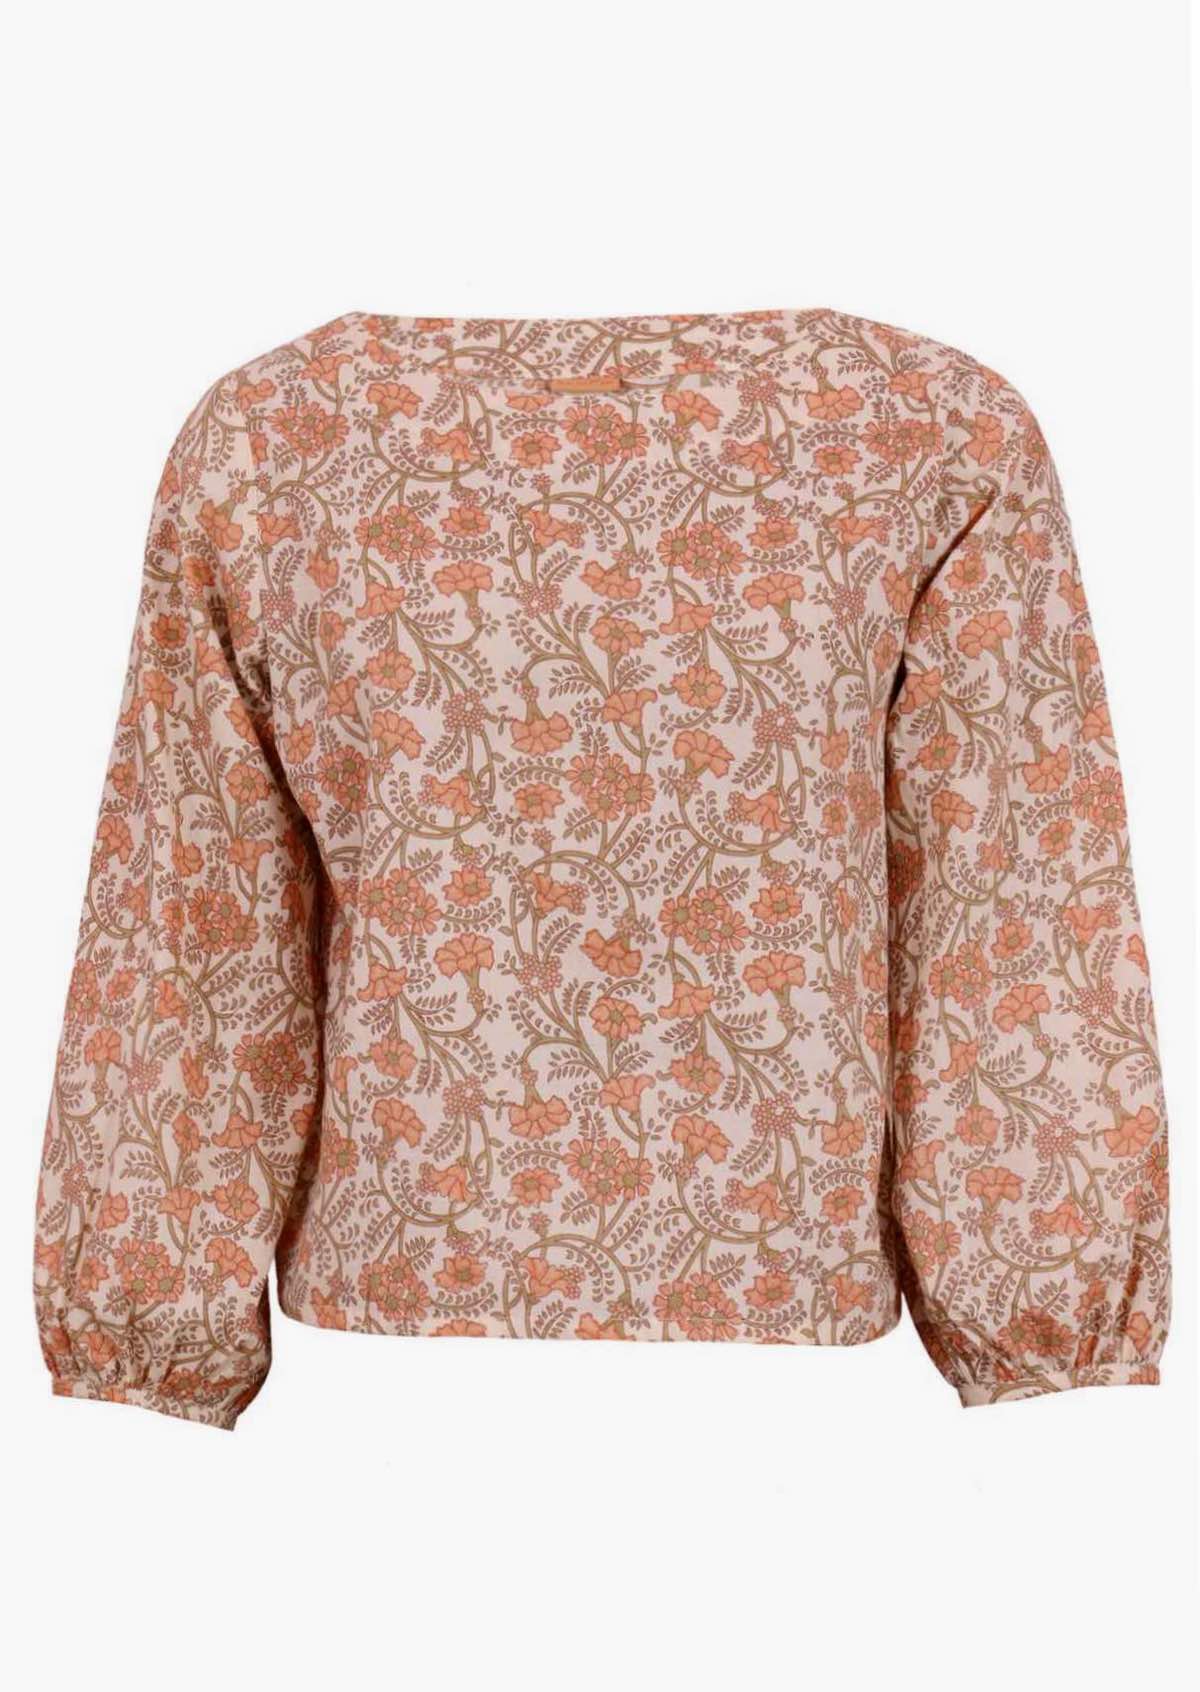 Isla Top Liberty front view of cotton floral women's top, cream with apricot coloured flowers